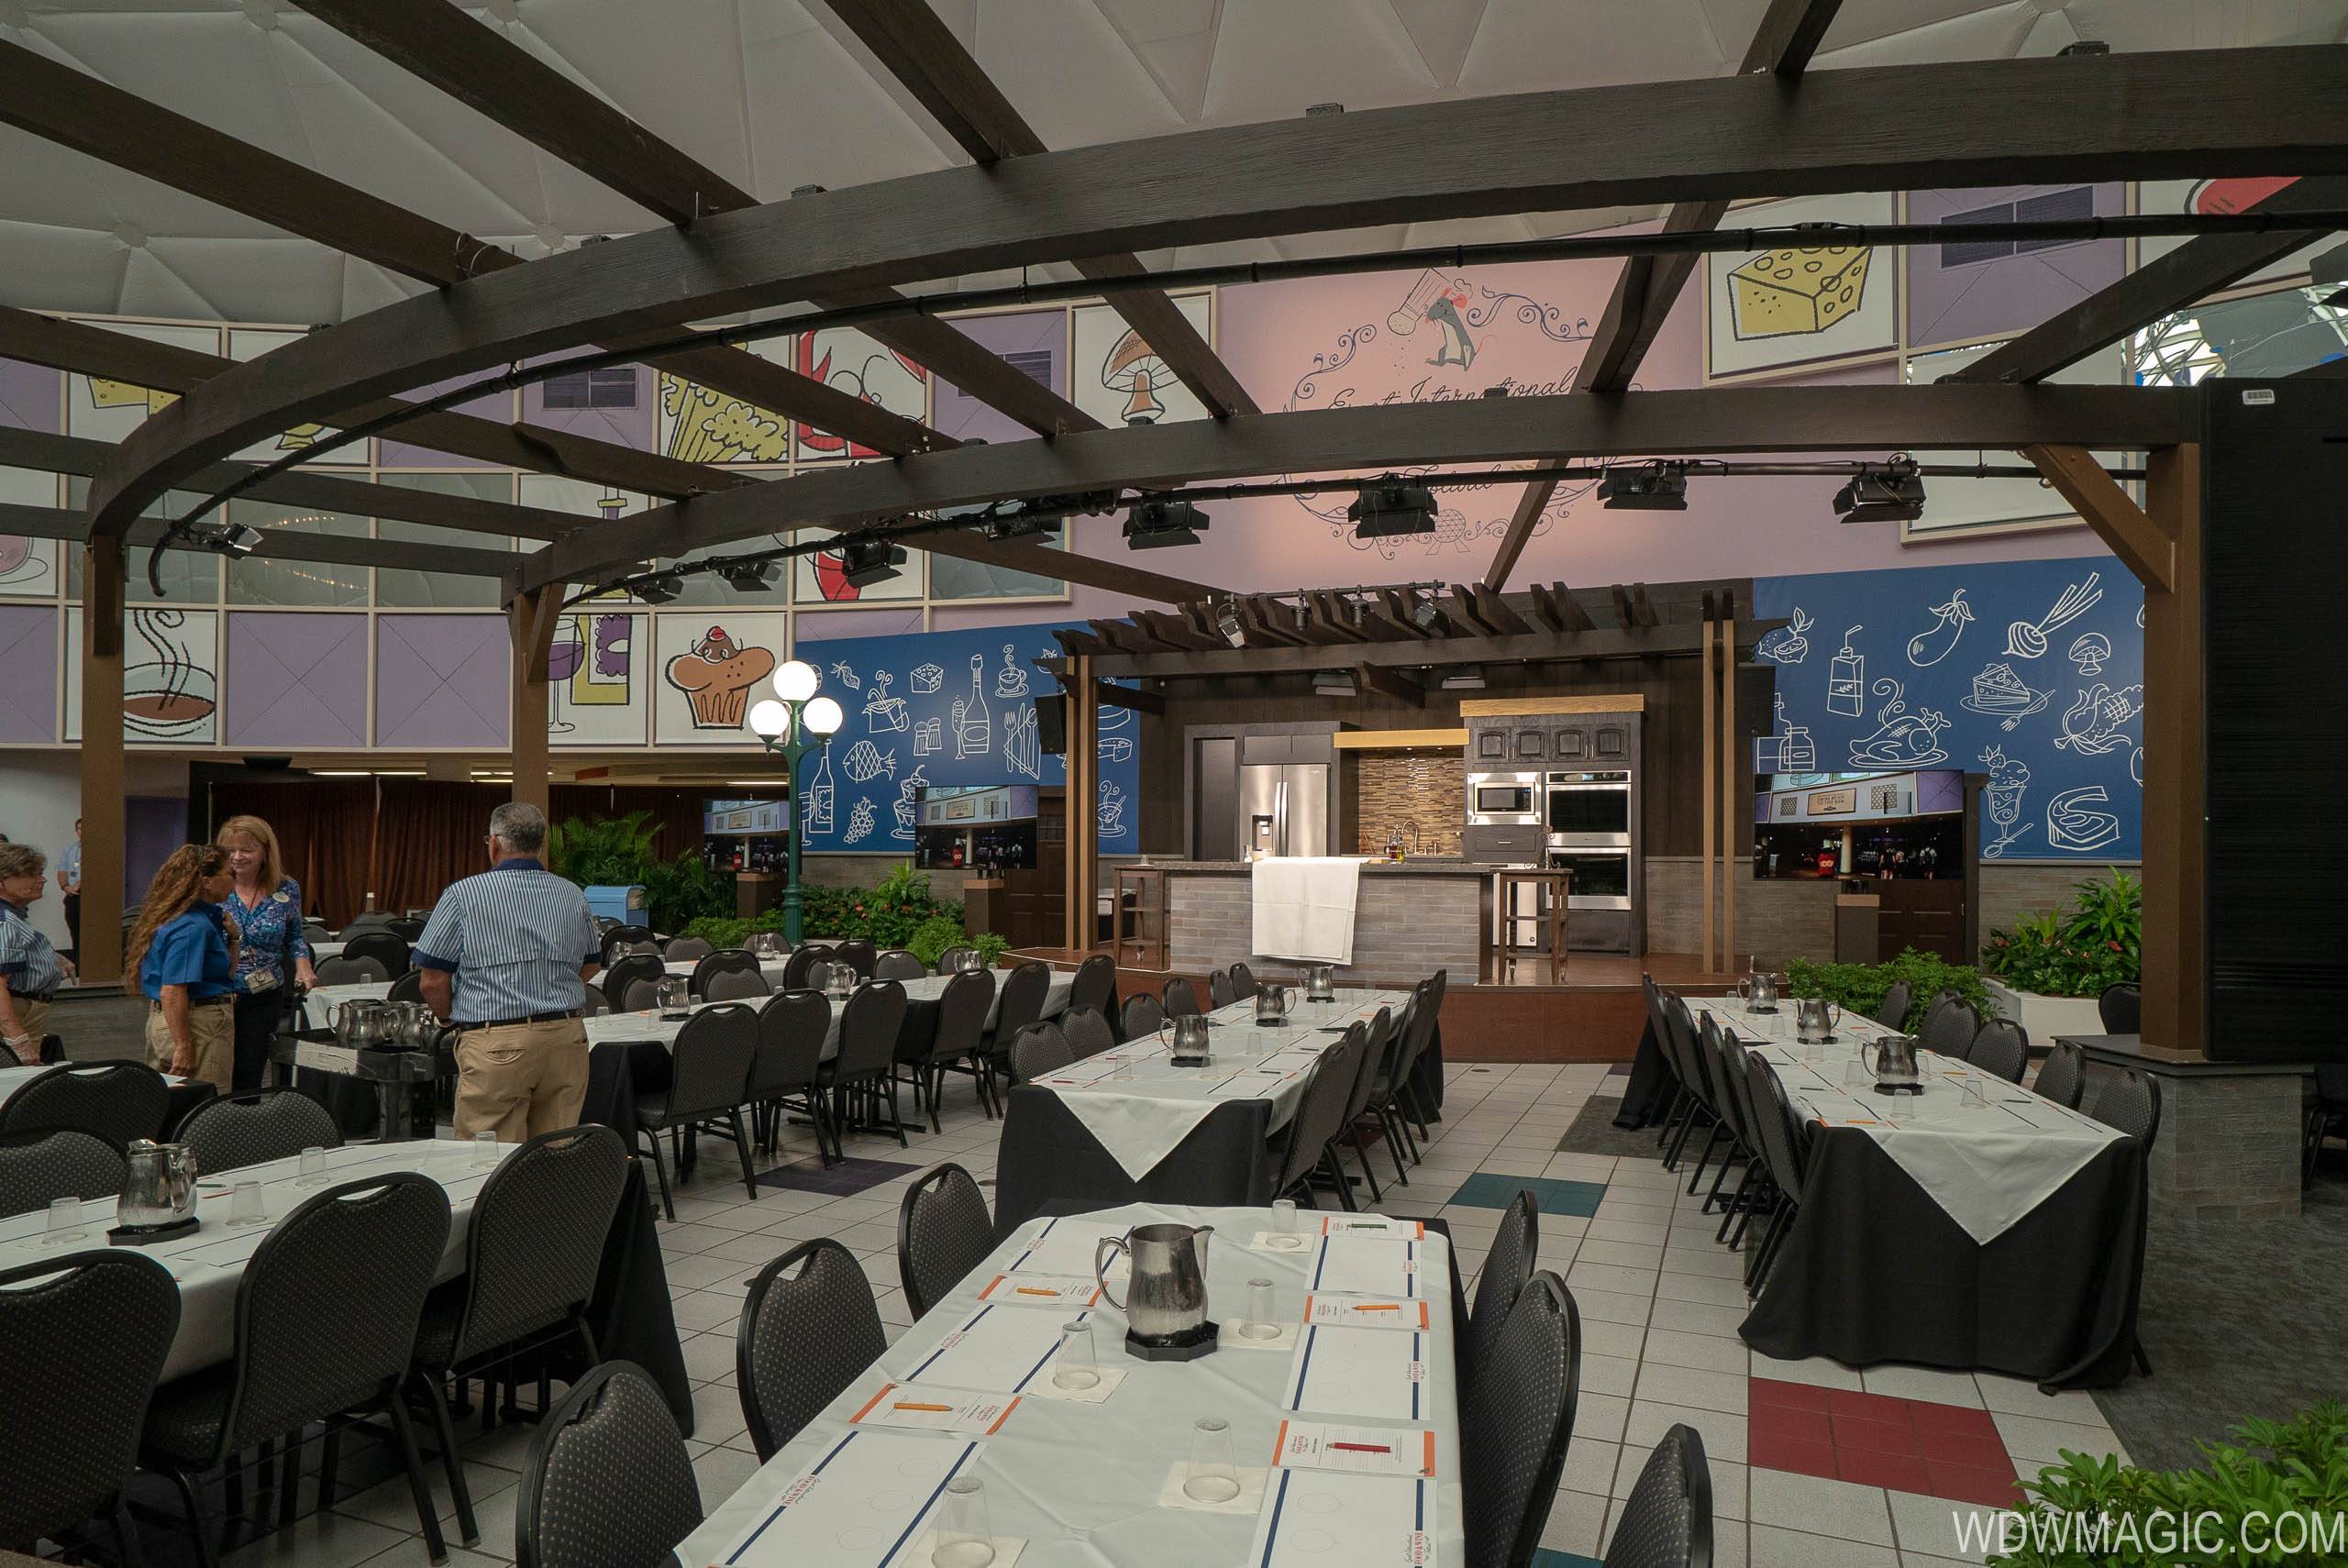 Culinary Stage for cooking demonstrations at Epcot International Food and Wine Festival